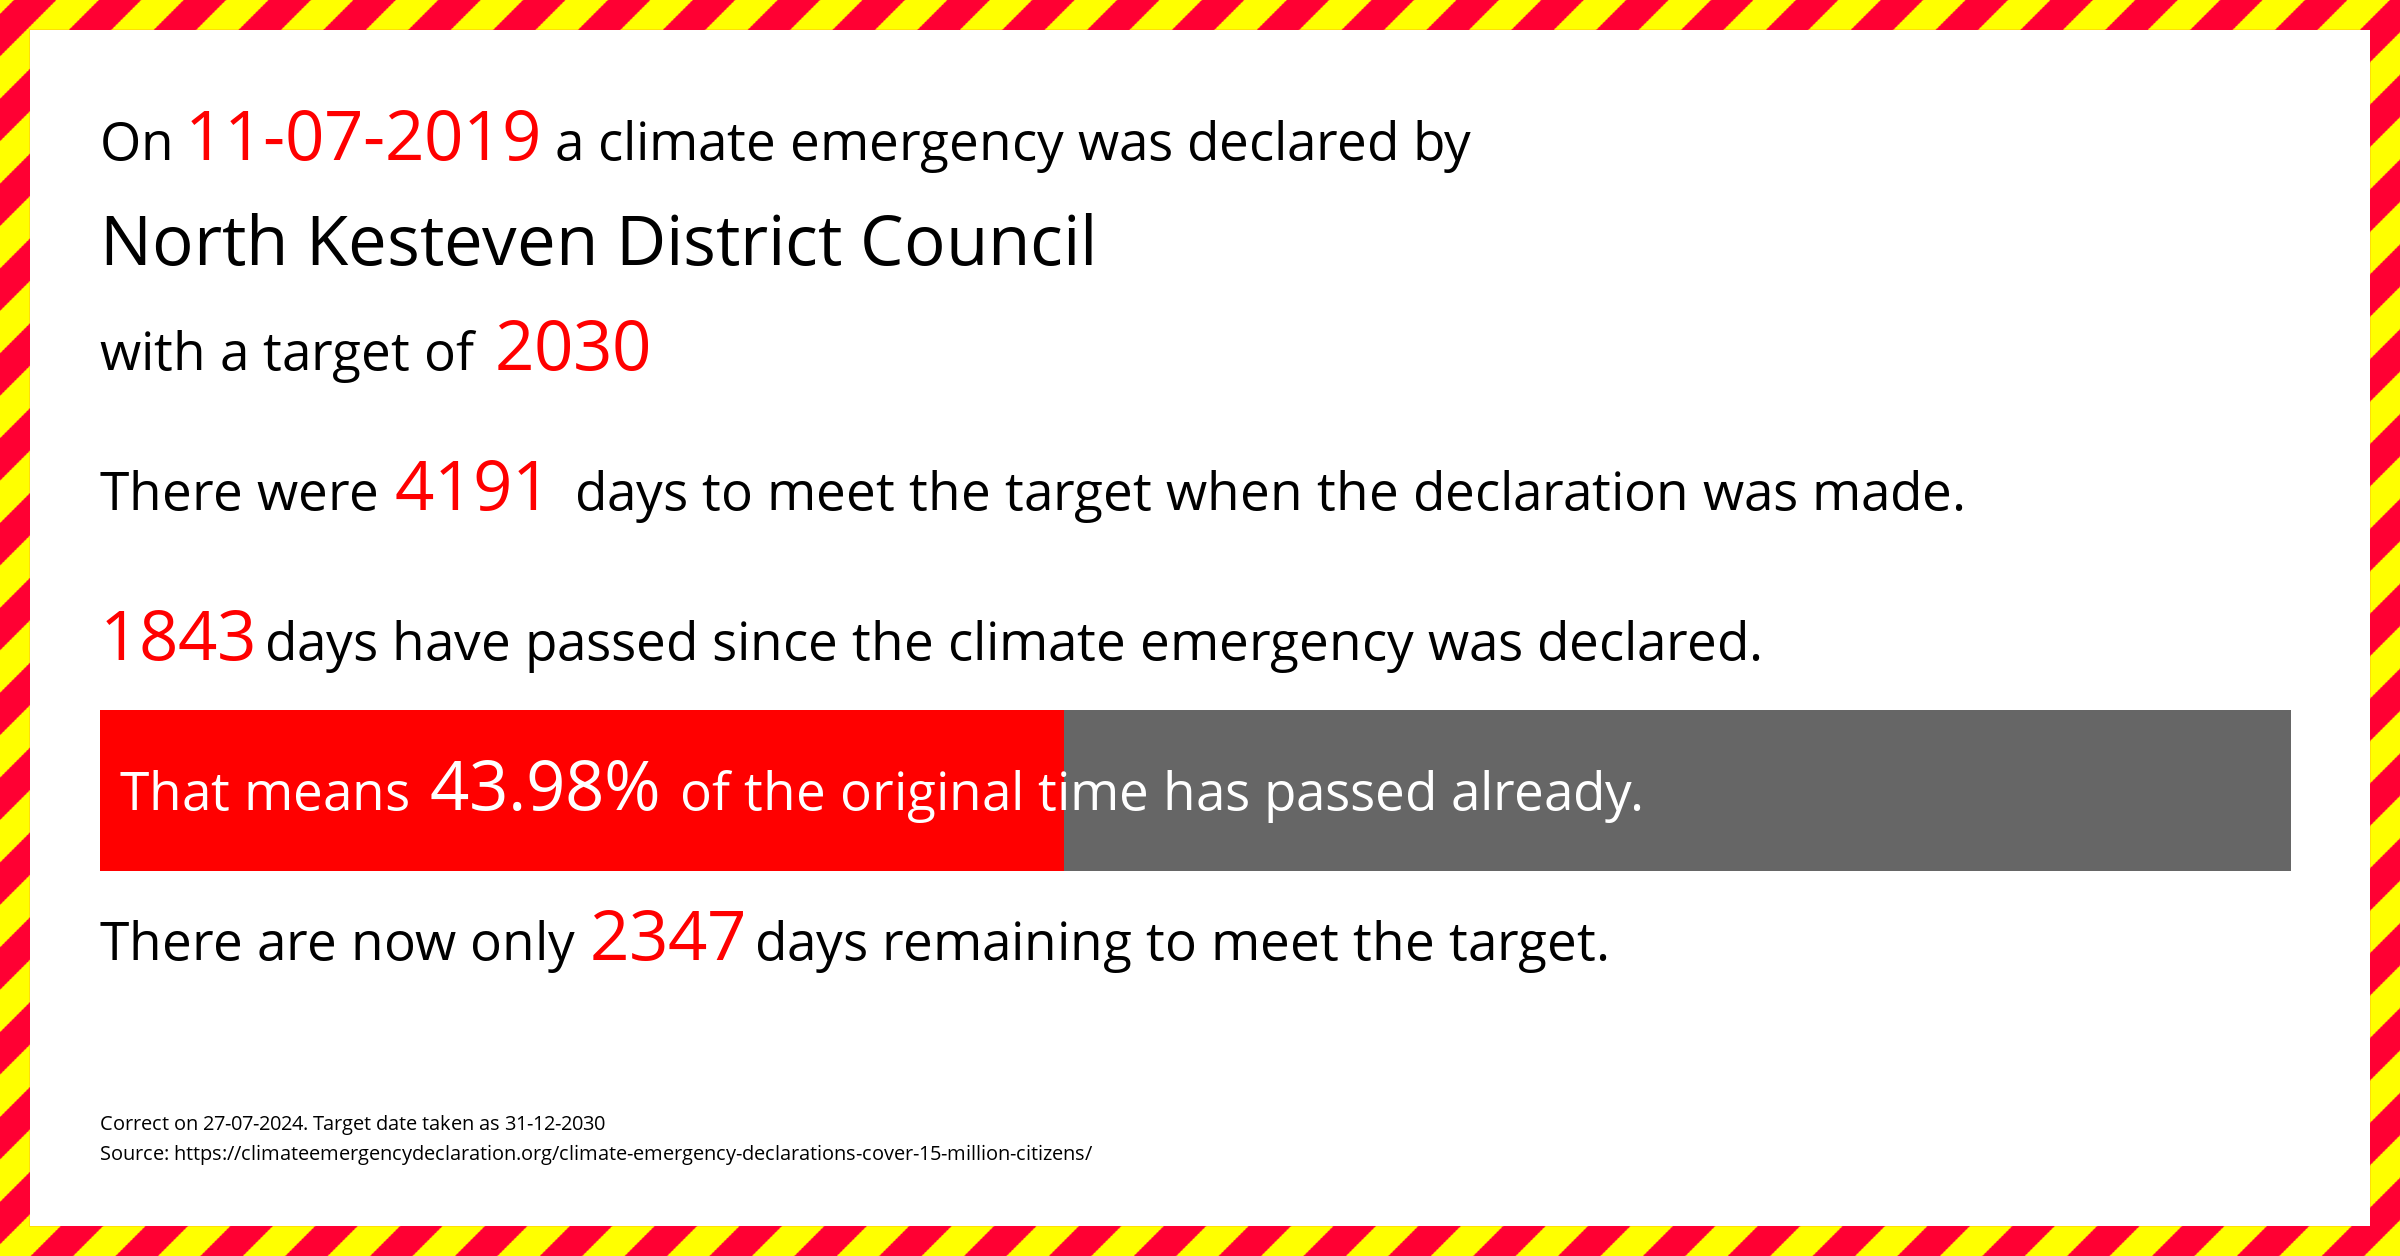 North Kesteven District Council declared a Climate emergency on Thursday 11th July 2019, with a target of 2030.